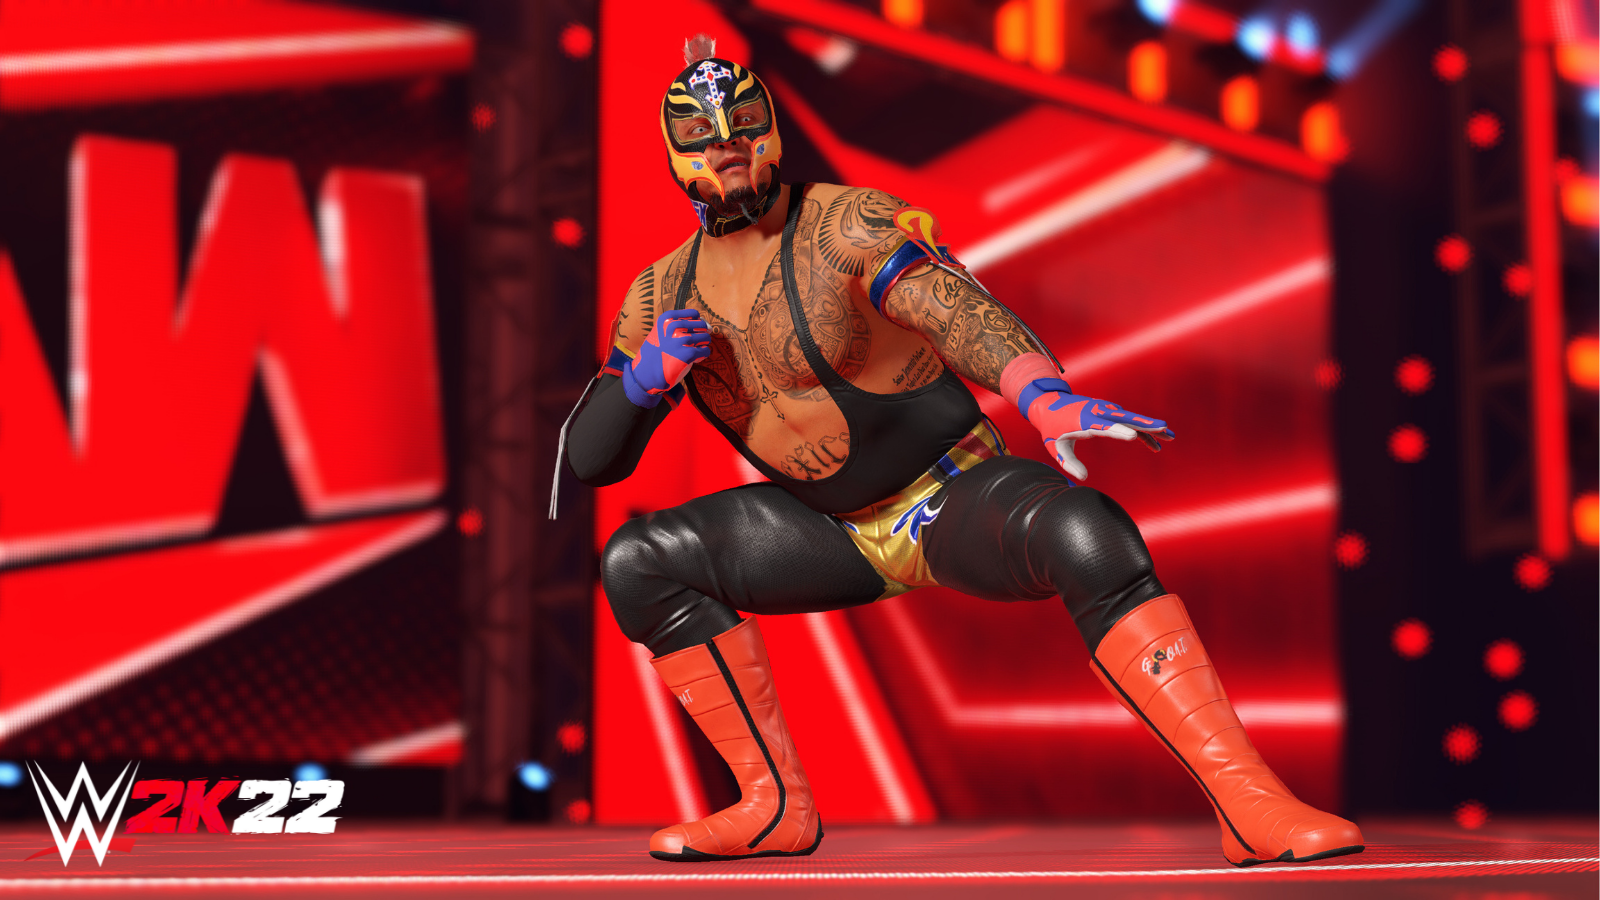 WWE 2K22 Review - 'I'm Not Dead Yet' - Operation Sports